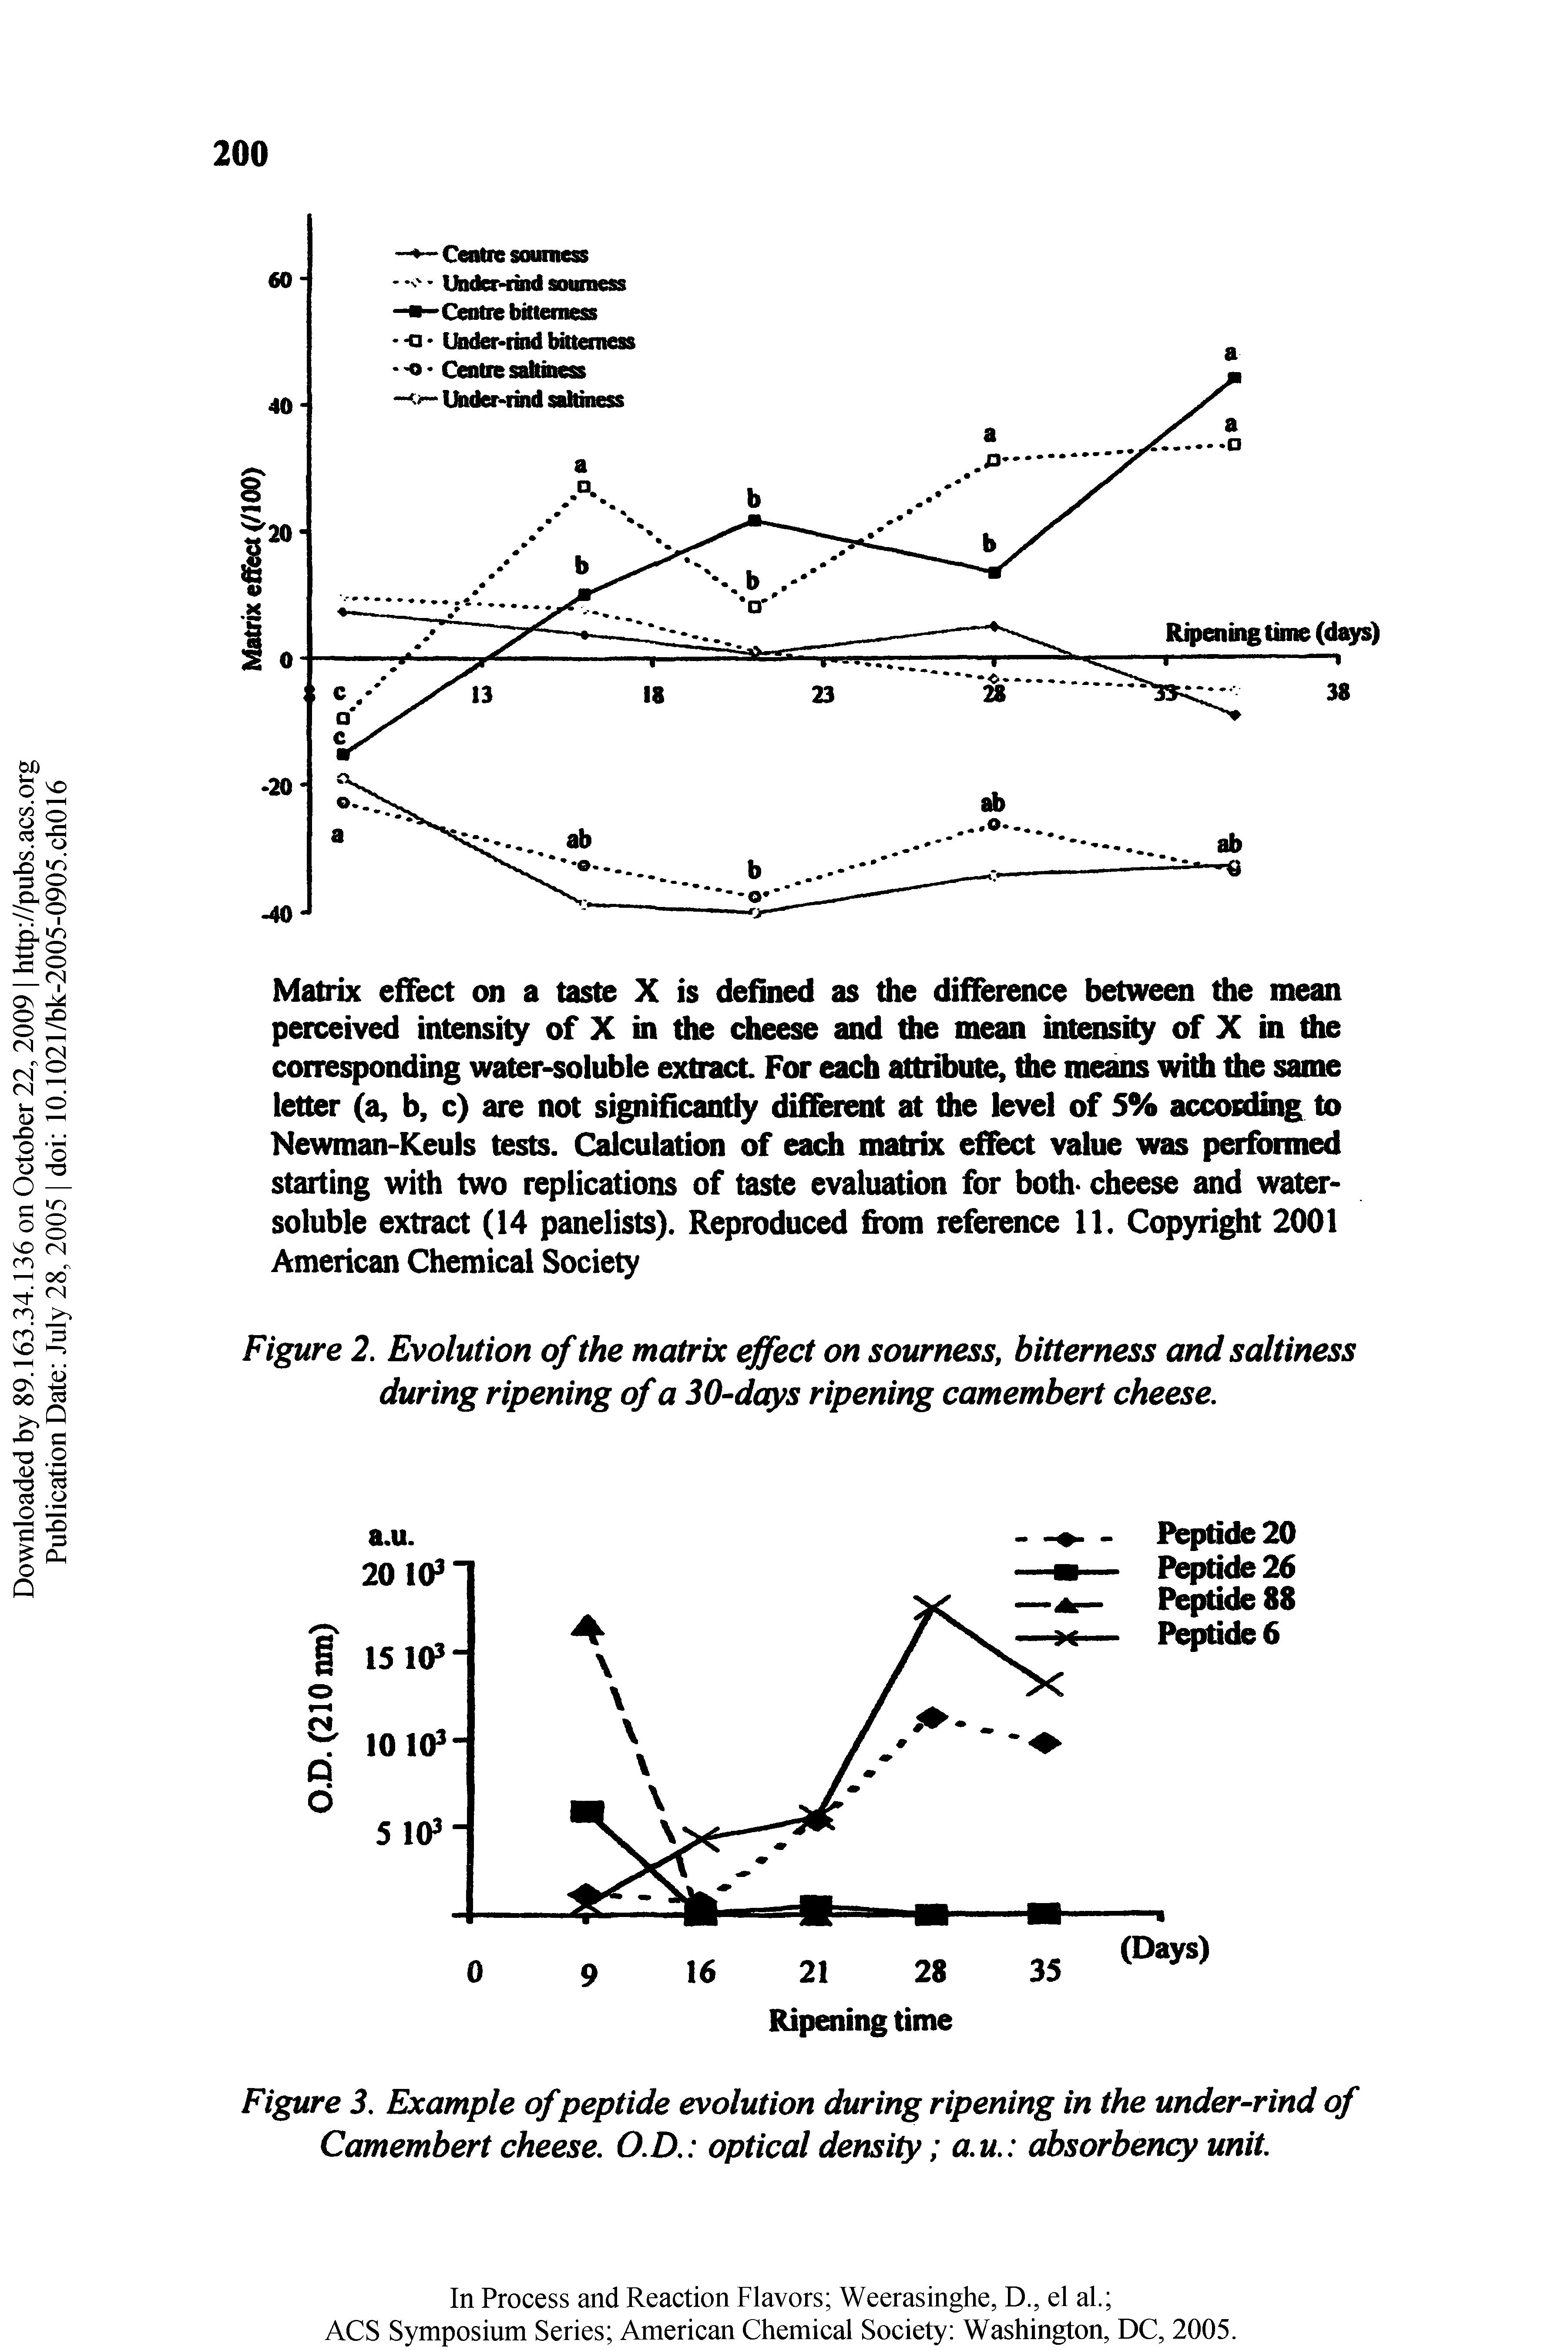 Figure 2. Evolution of the matrix effect on sourness, bitterness and saltiness during ripening of a 30 dqys ripening camembert cheese.